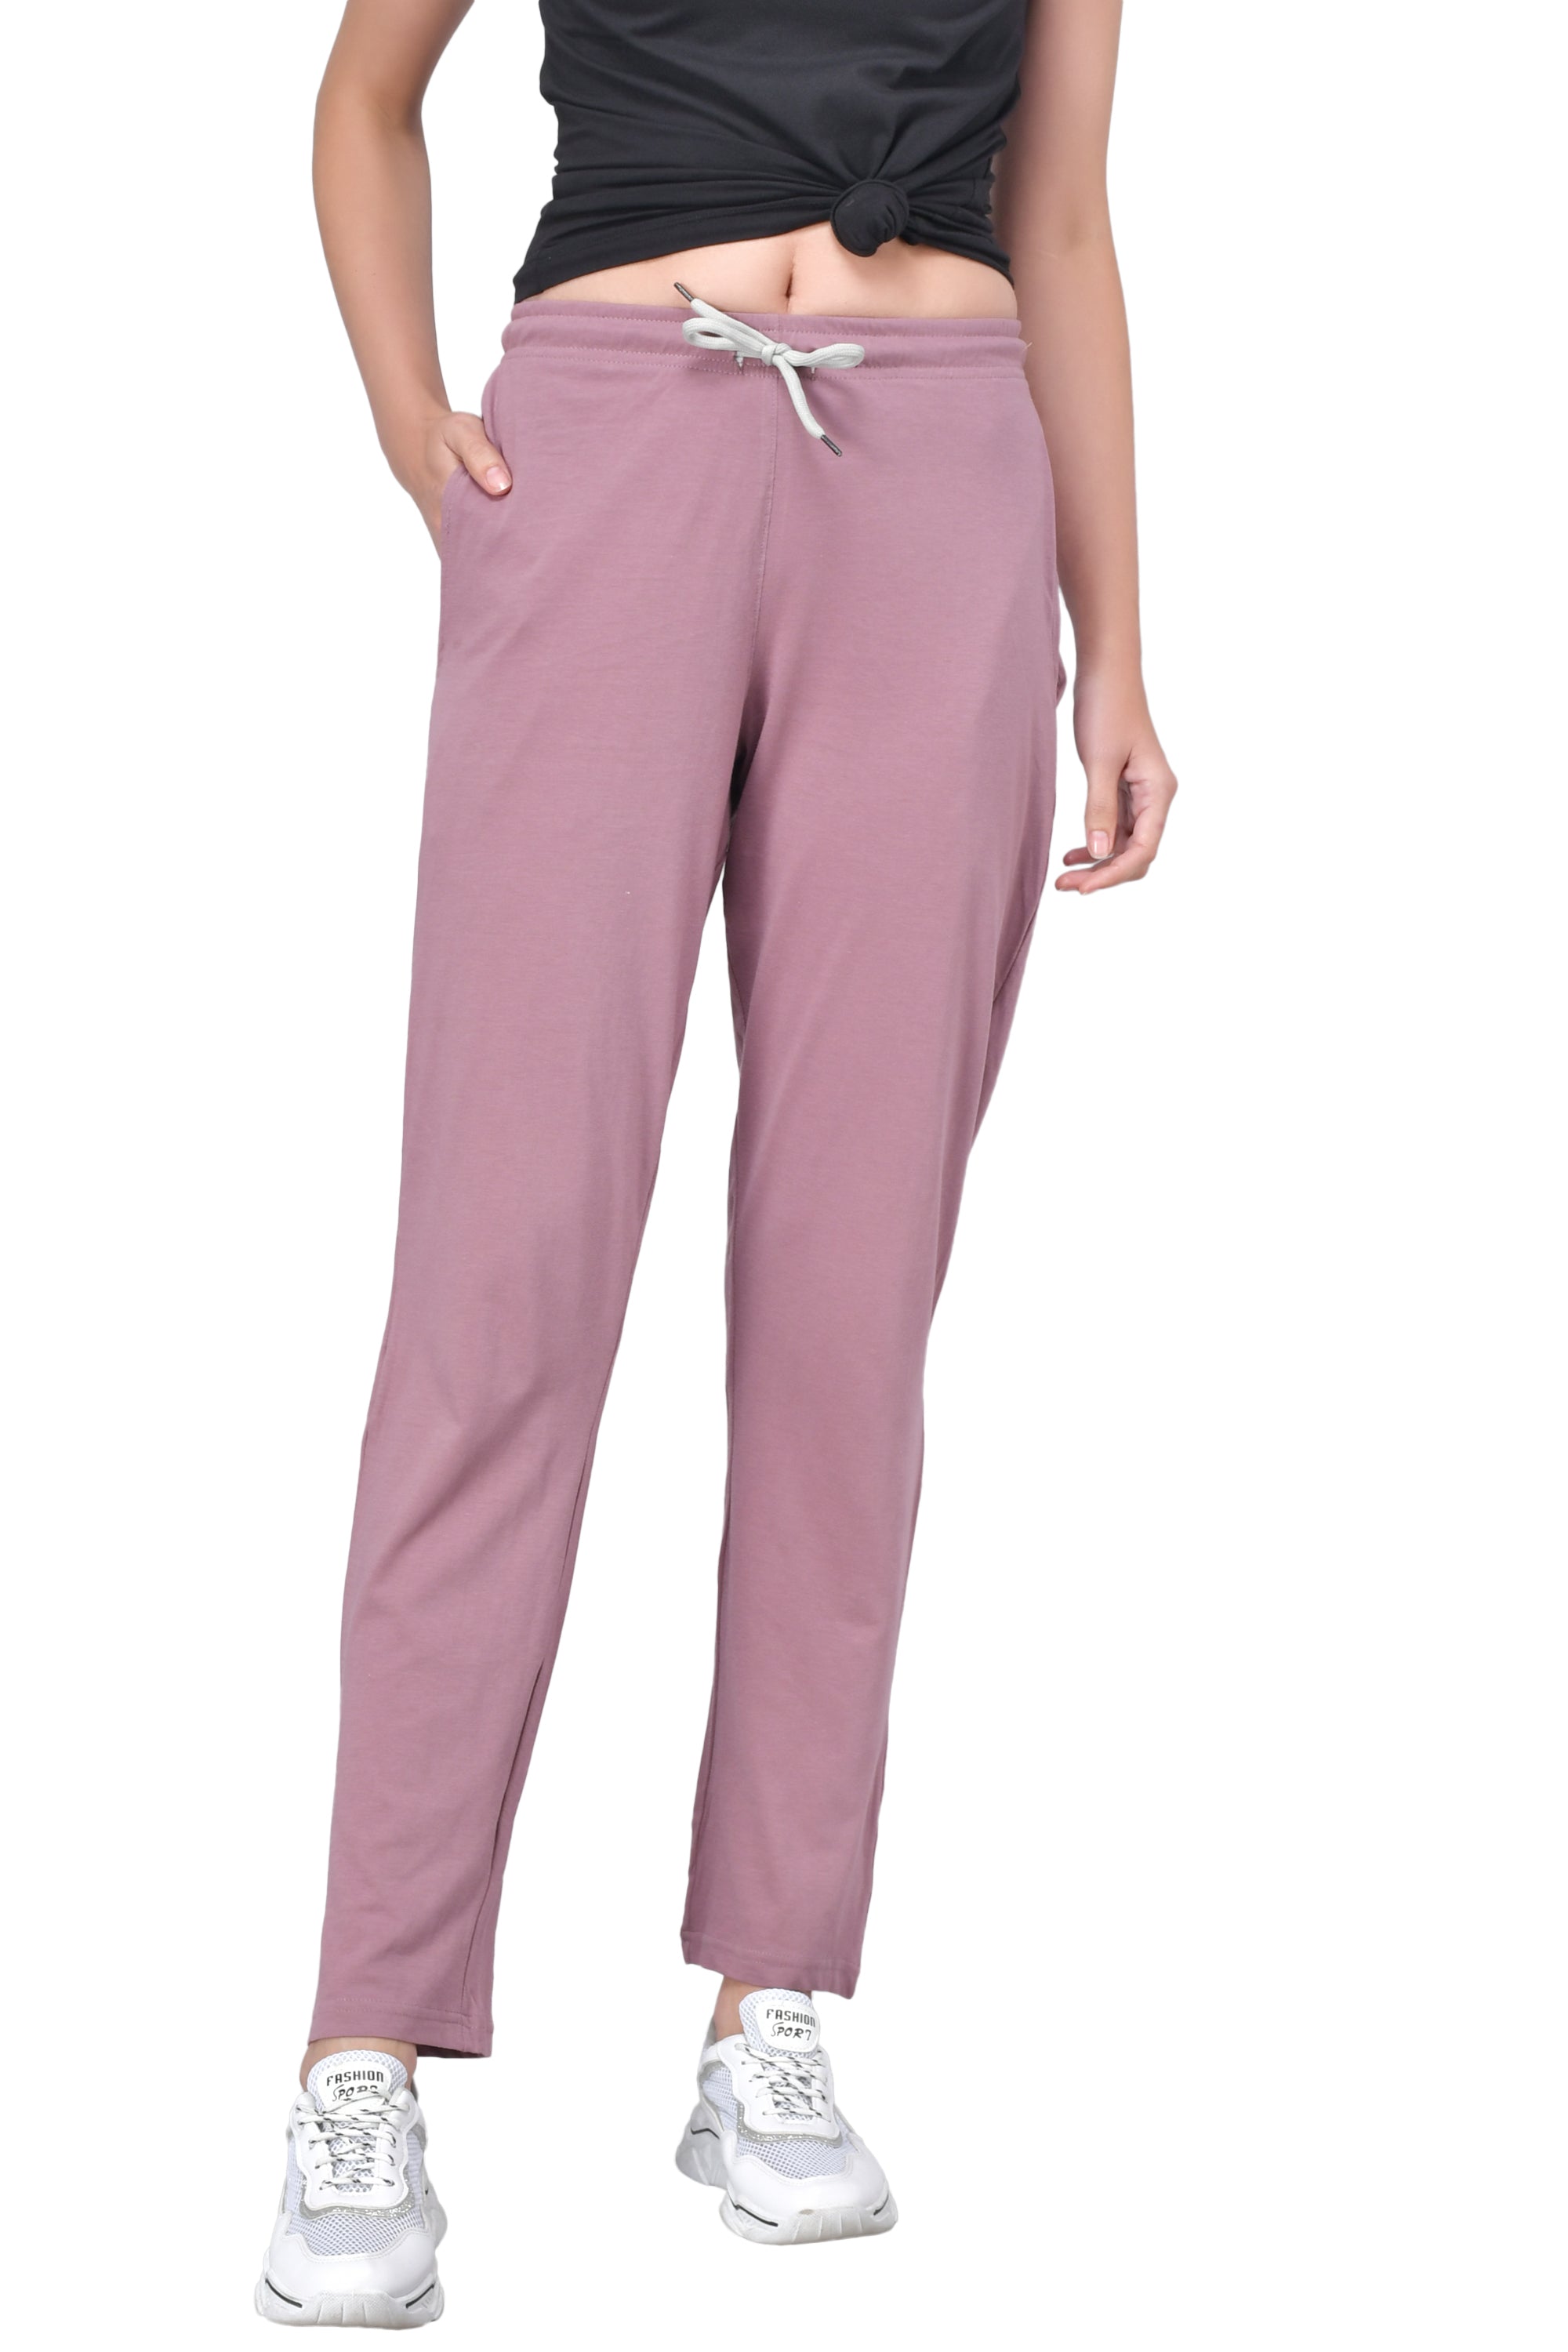 TRYCLO Printed Women Multicolor Track Pants - Buy TRYCLO Printed Women  Multicolor Track Pants Online at Best Prices in India | Flipkart.com